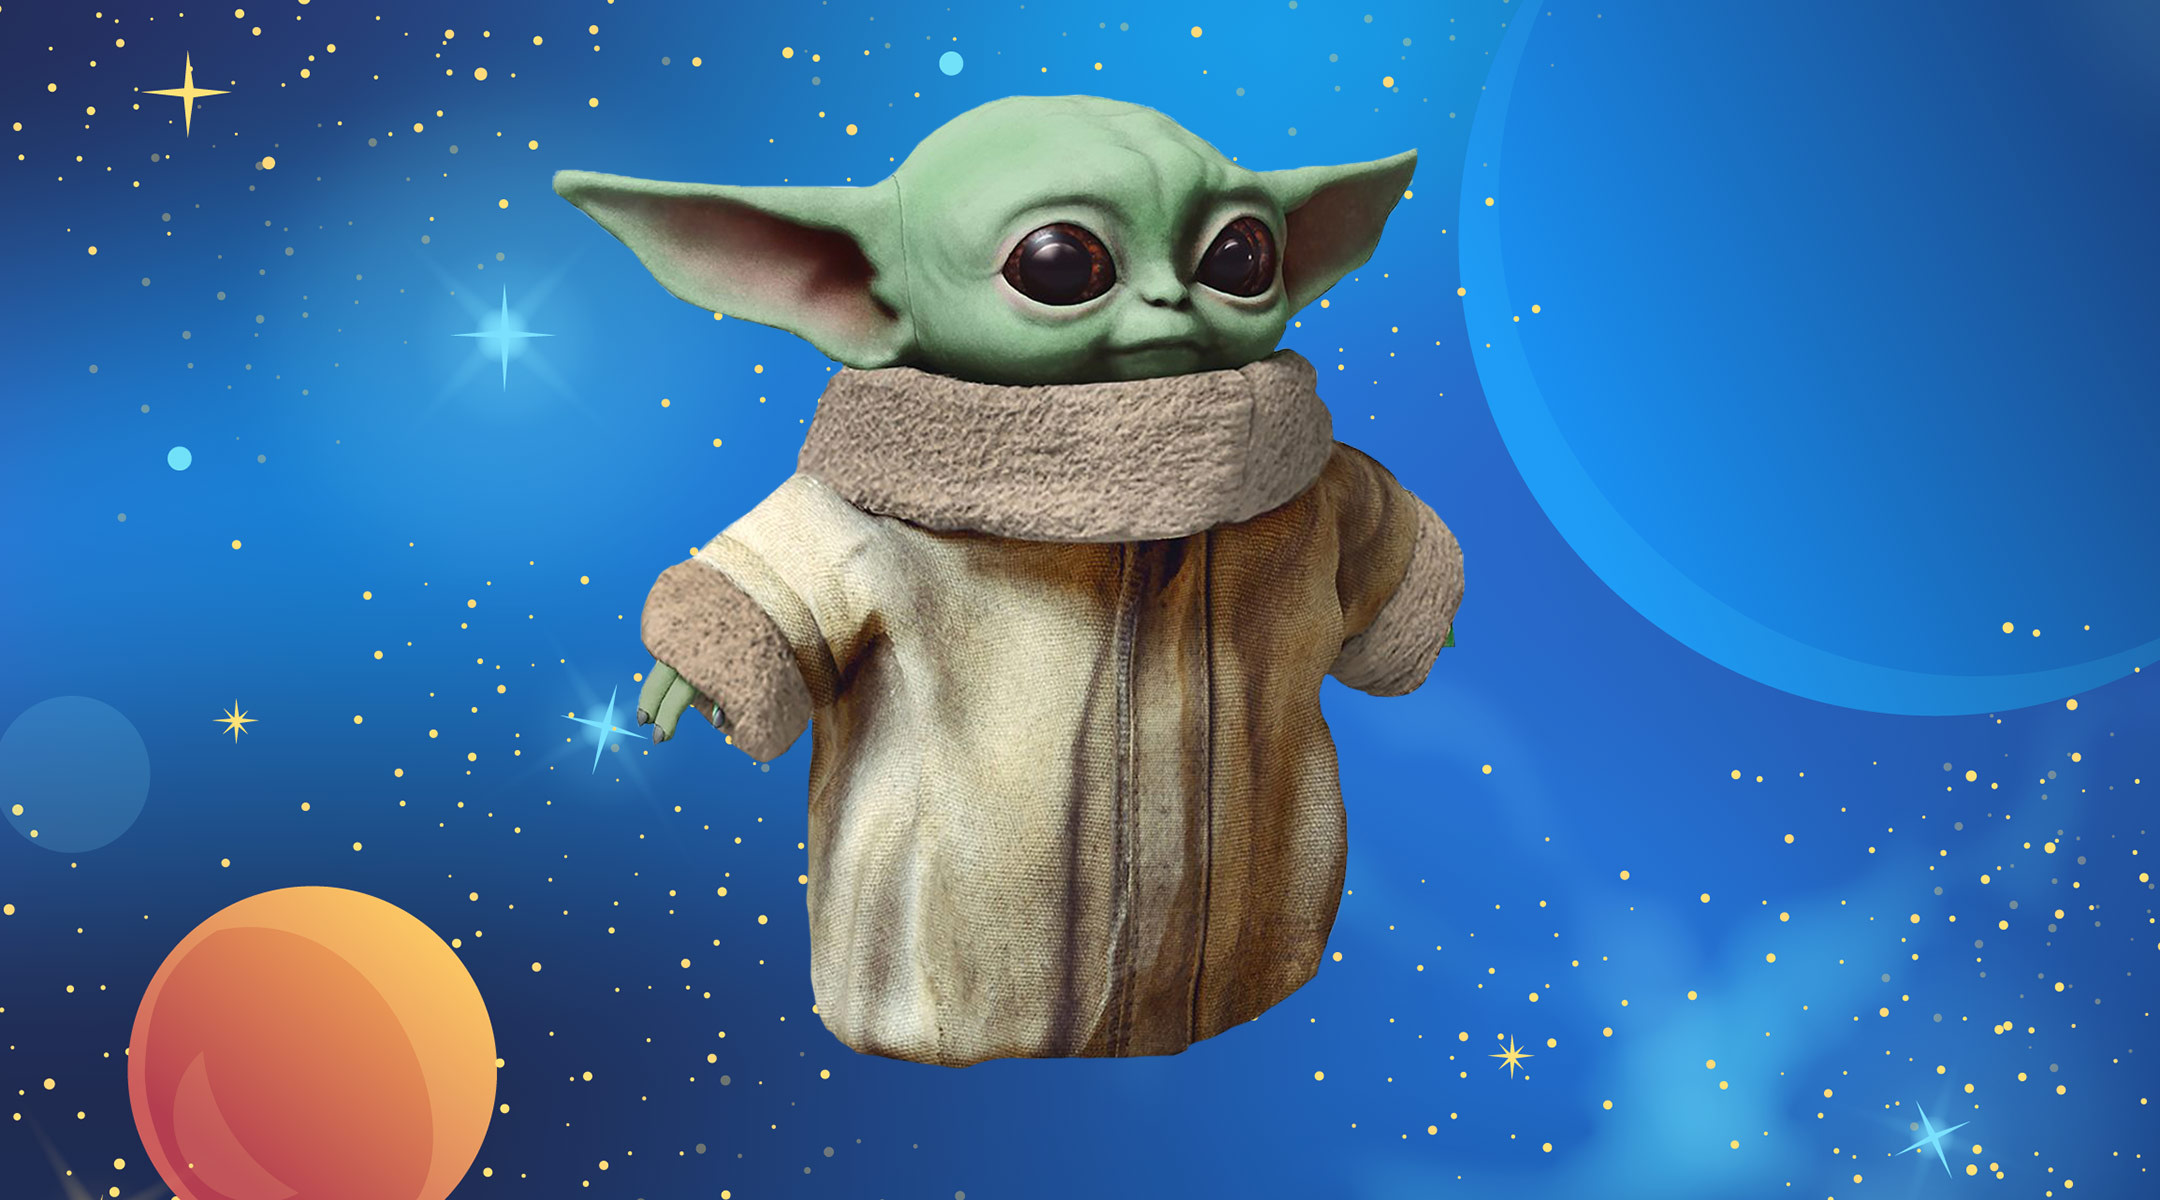 New toy, it is'; Disney reveals new Baby Yoda toy to be released